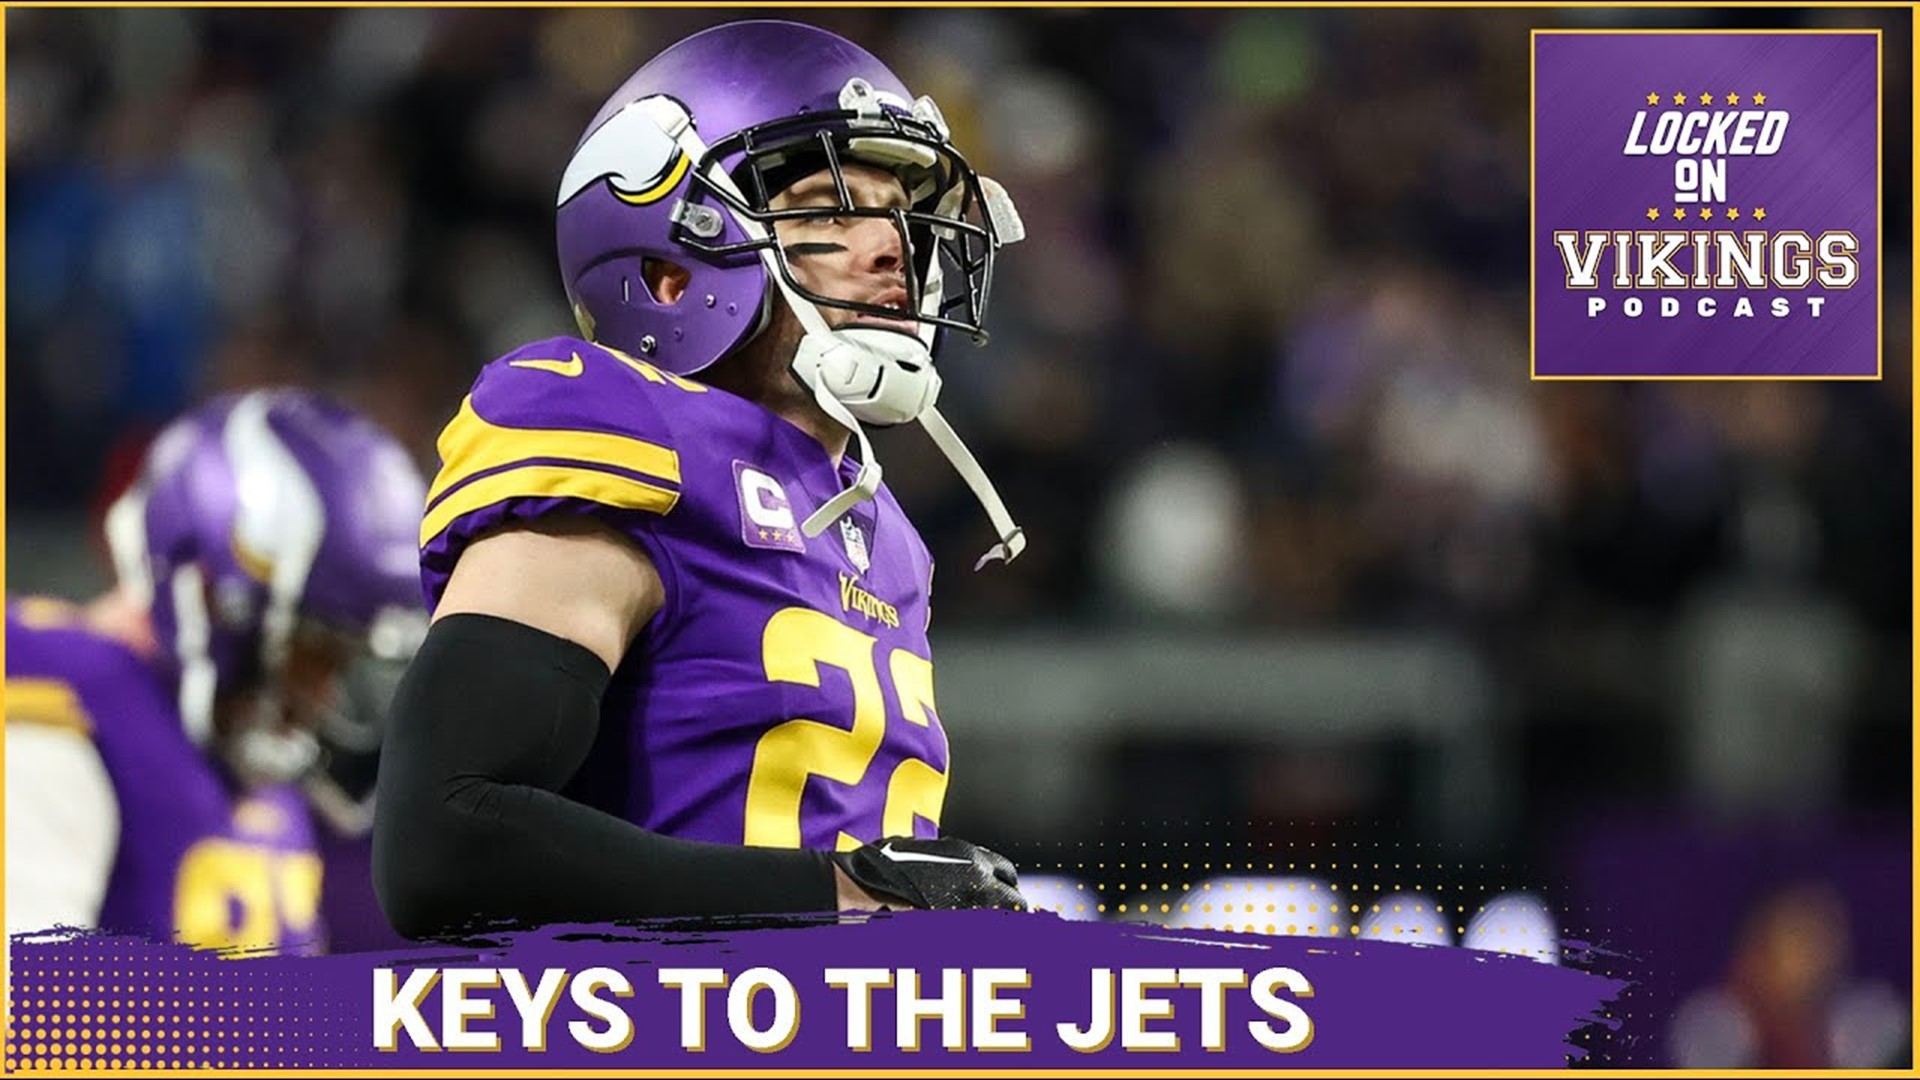 The New York Jets will be a tough out for the Minnesota Vikings on Sunday.